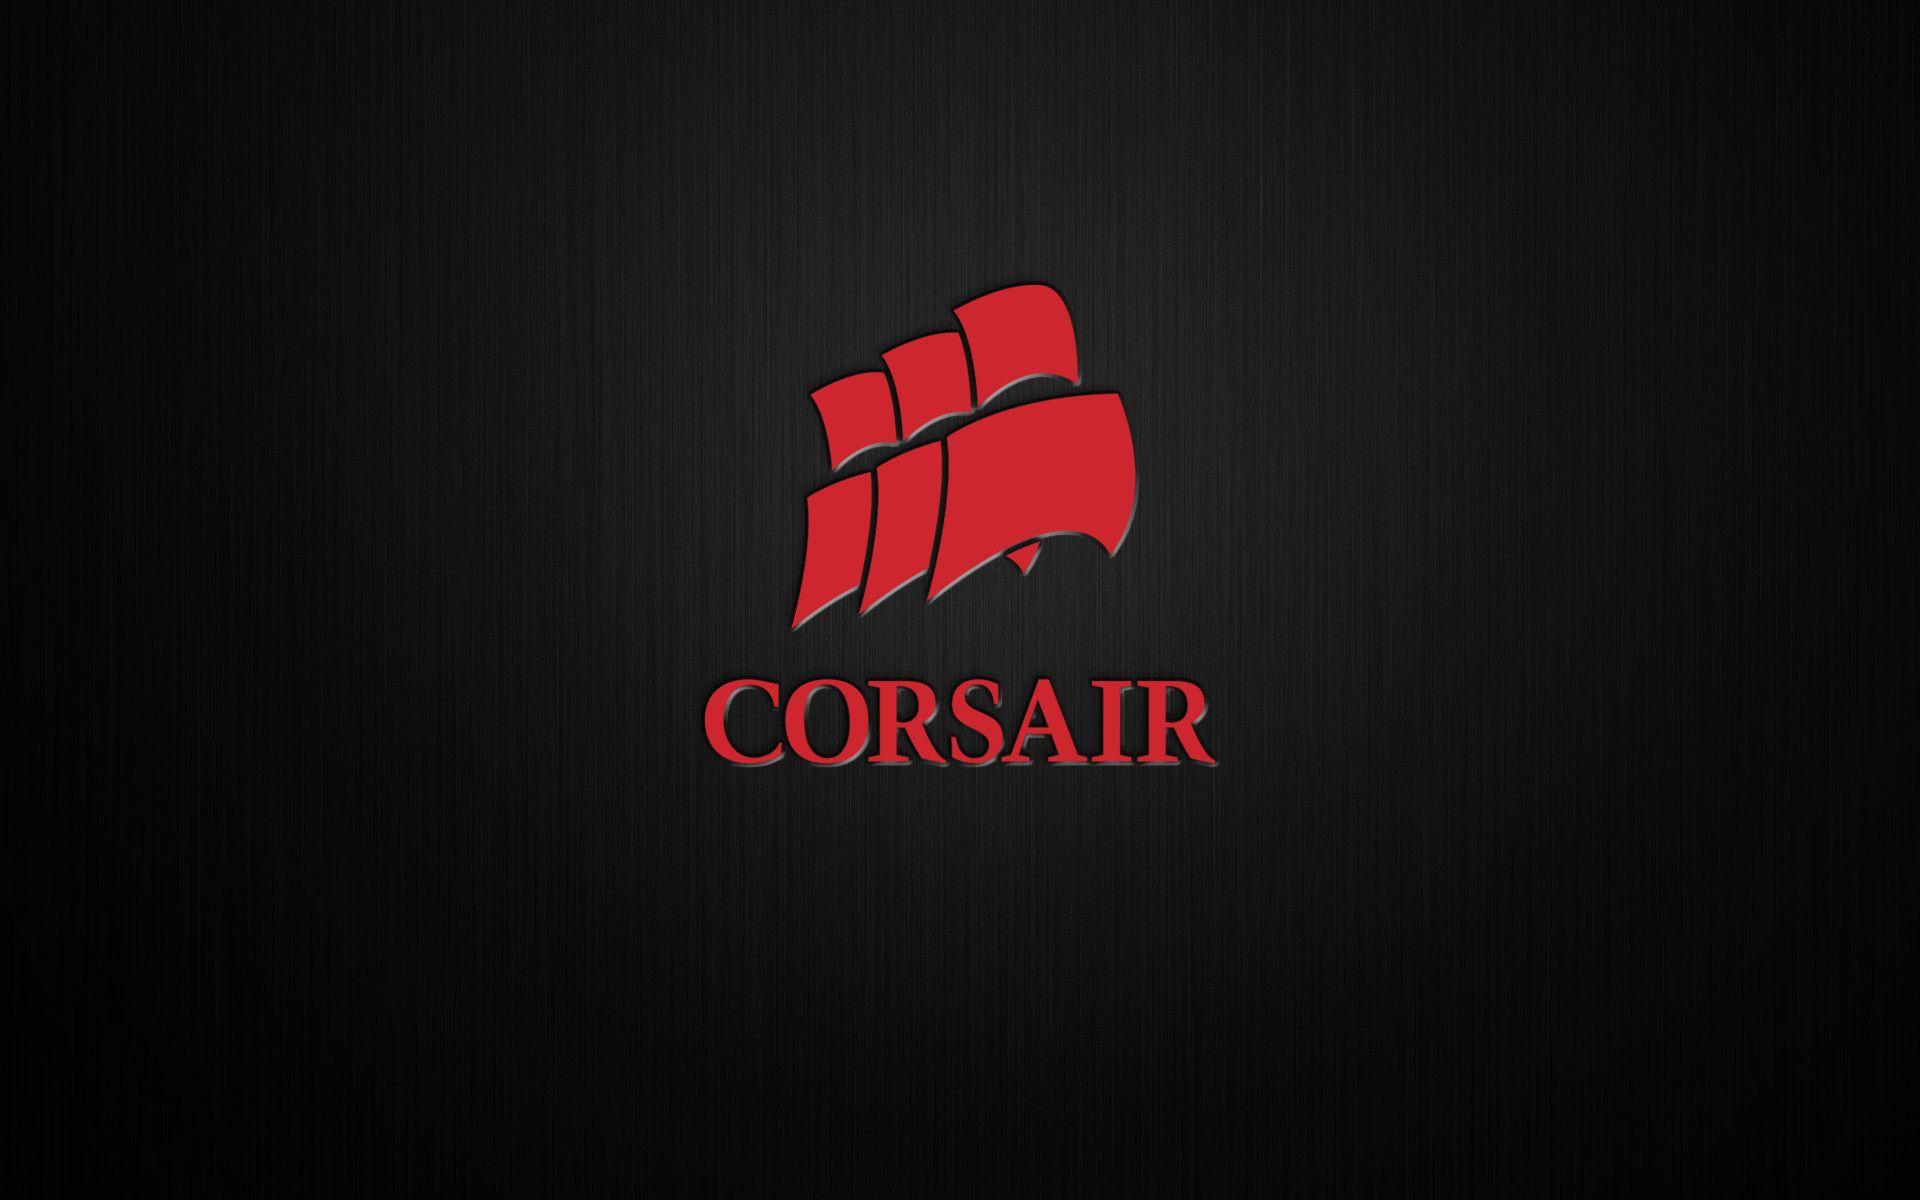 Corsair Wallpaper GIF Msi pc rgb theme gaming wallpapers holiday 1080 1080p desktop curved mpg global backgrounds gifts vs monitor 1920 animate could